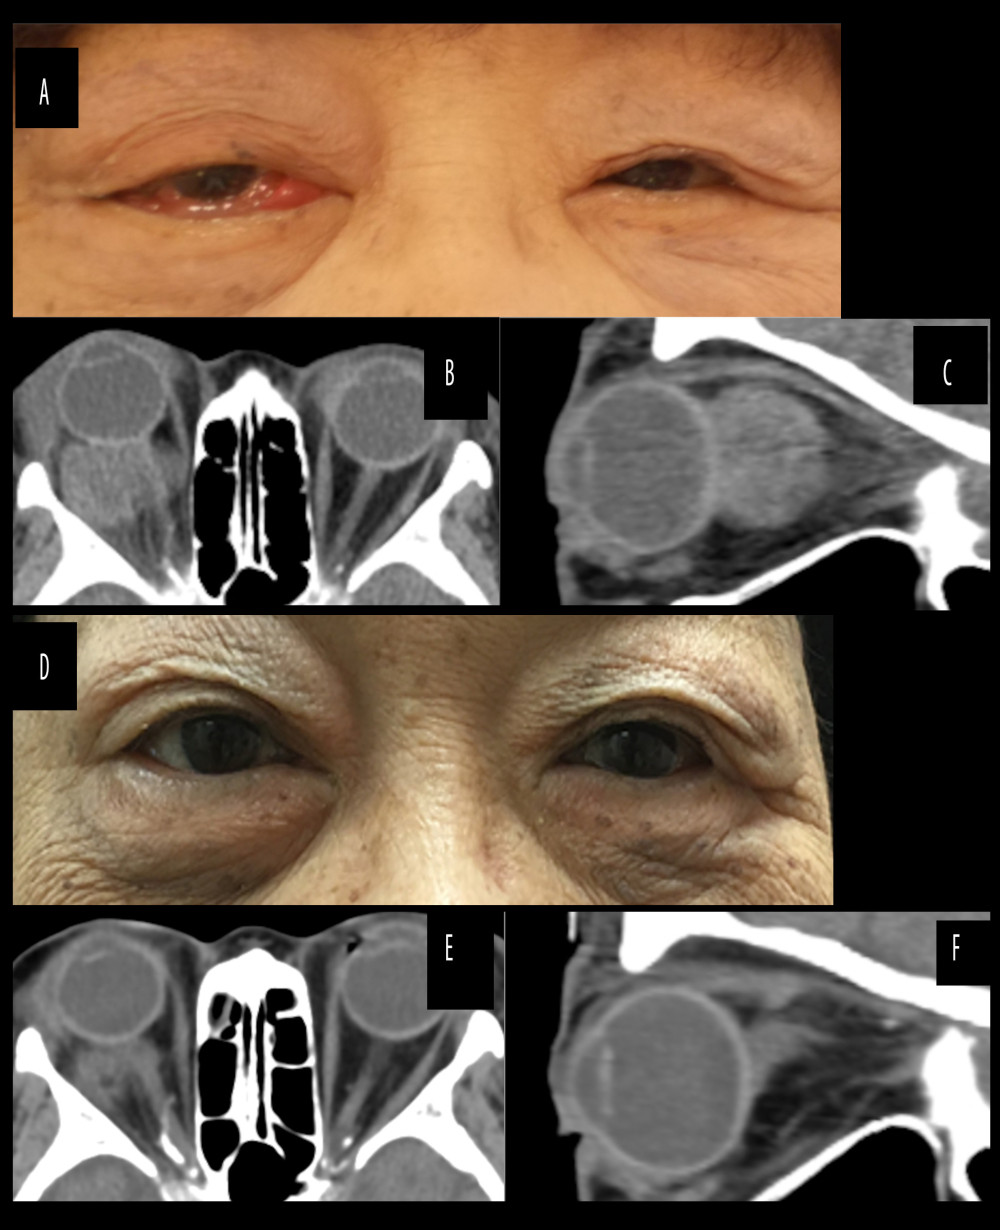 (A) Face photograph of the patient showing right exophthalmos. Axial (B) and sagittal (C) computed tomography (CT) showing a 3.1-cm diameter mass in the right orbit. (D) Face photograph showing regression of the right exophthalmos 124 days after radiation therapy. Axial (E) and sagittal (F) CT showing shrinkage of the orbital tumor.